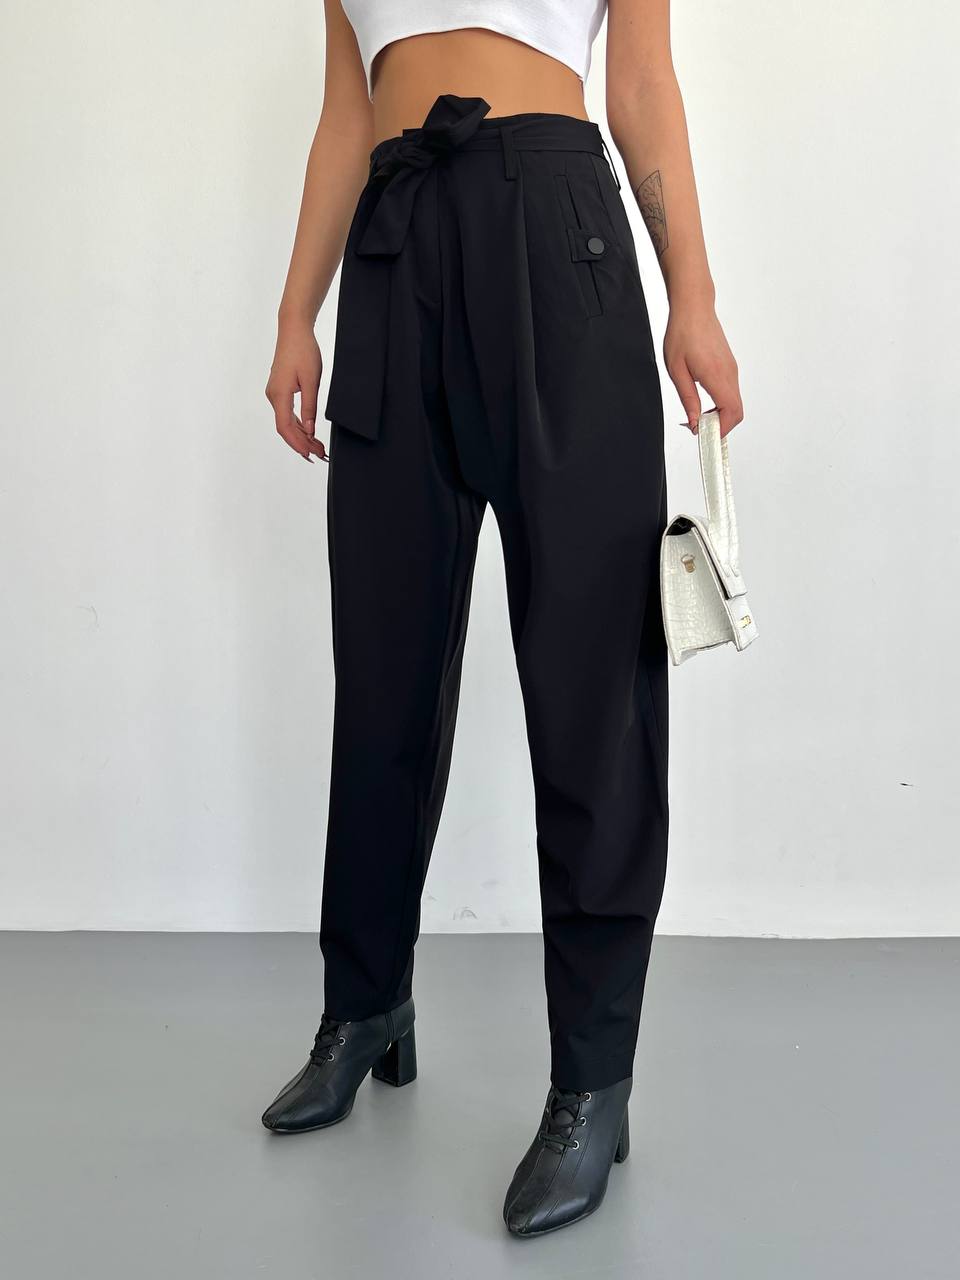 A wholesale clothing model wears qes10006-belted-trousers-black, Turkish wholesale Pants of Qesto Fashion